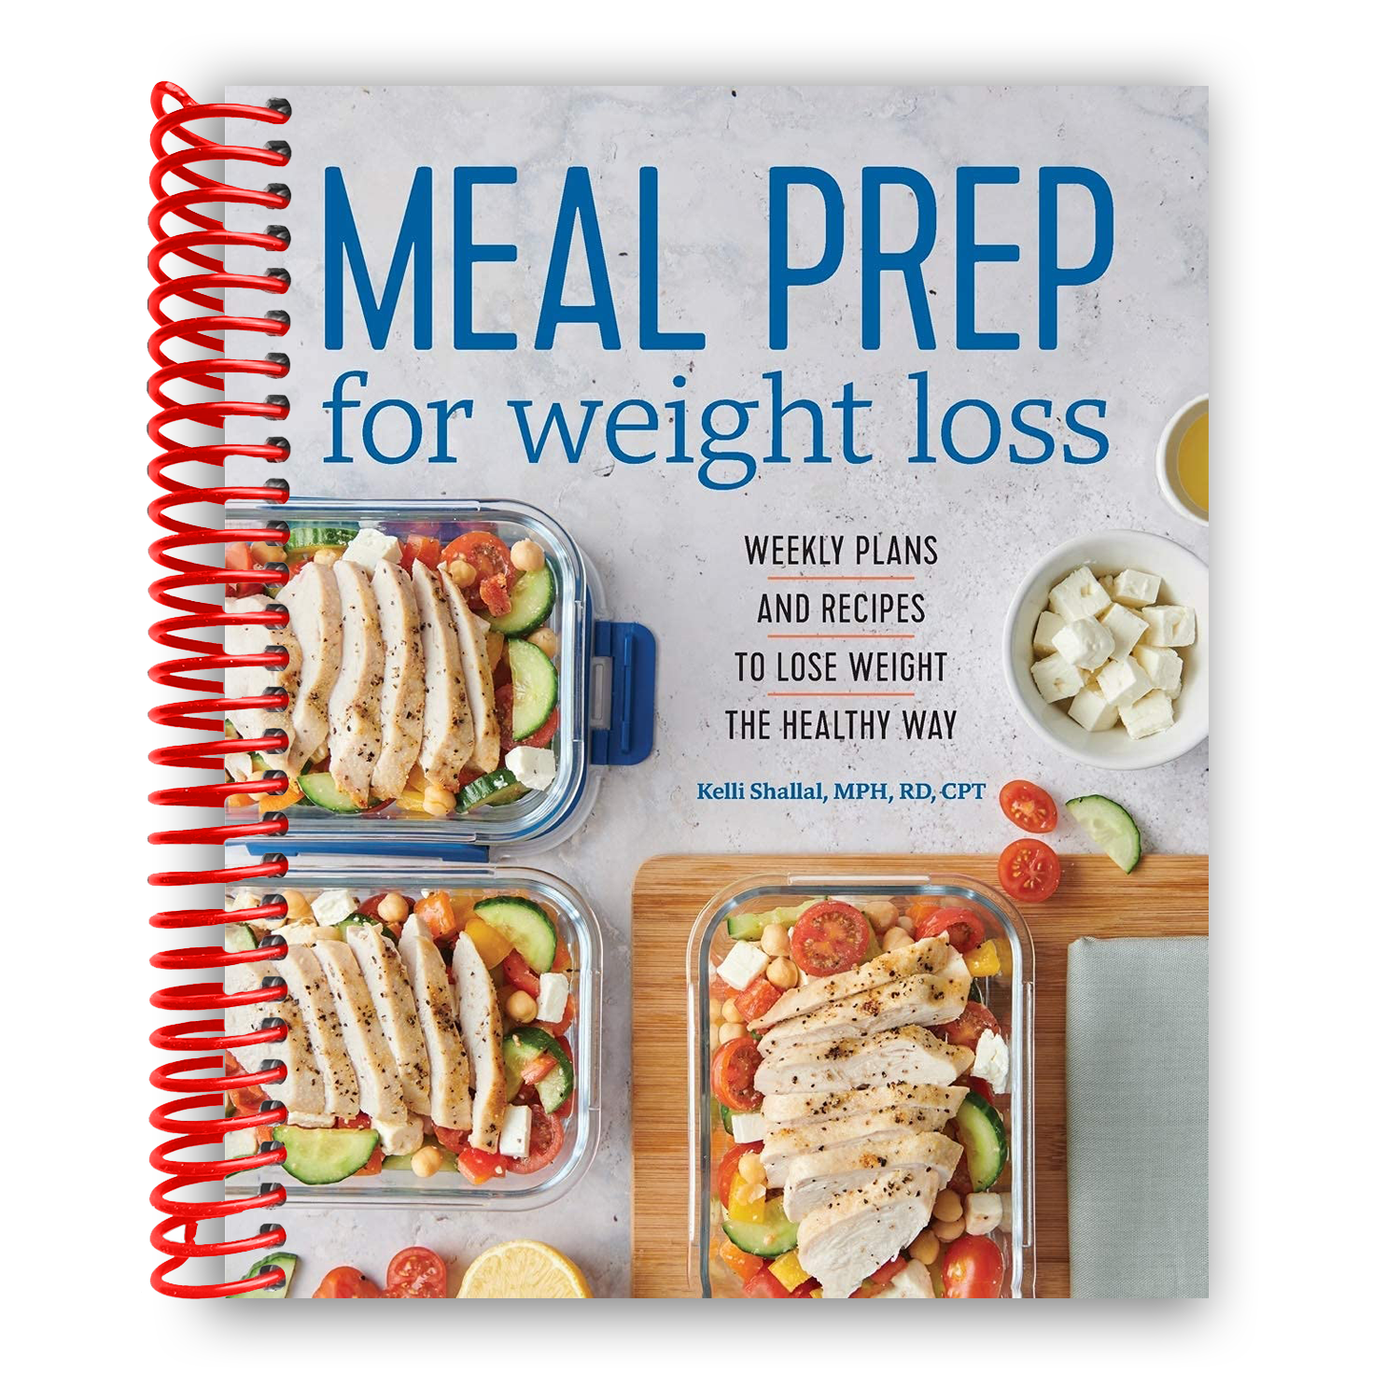 Meal Prep for Weight Loss: Weekly Plans and Recipes to Lose Weight the Healthy Way (Spiral Bound)